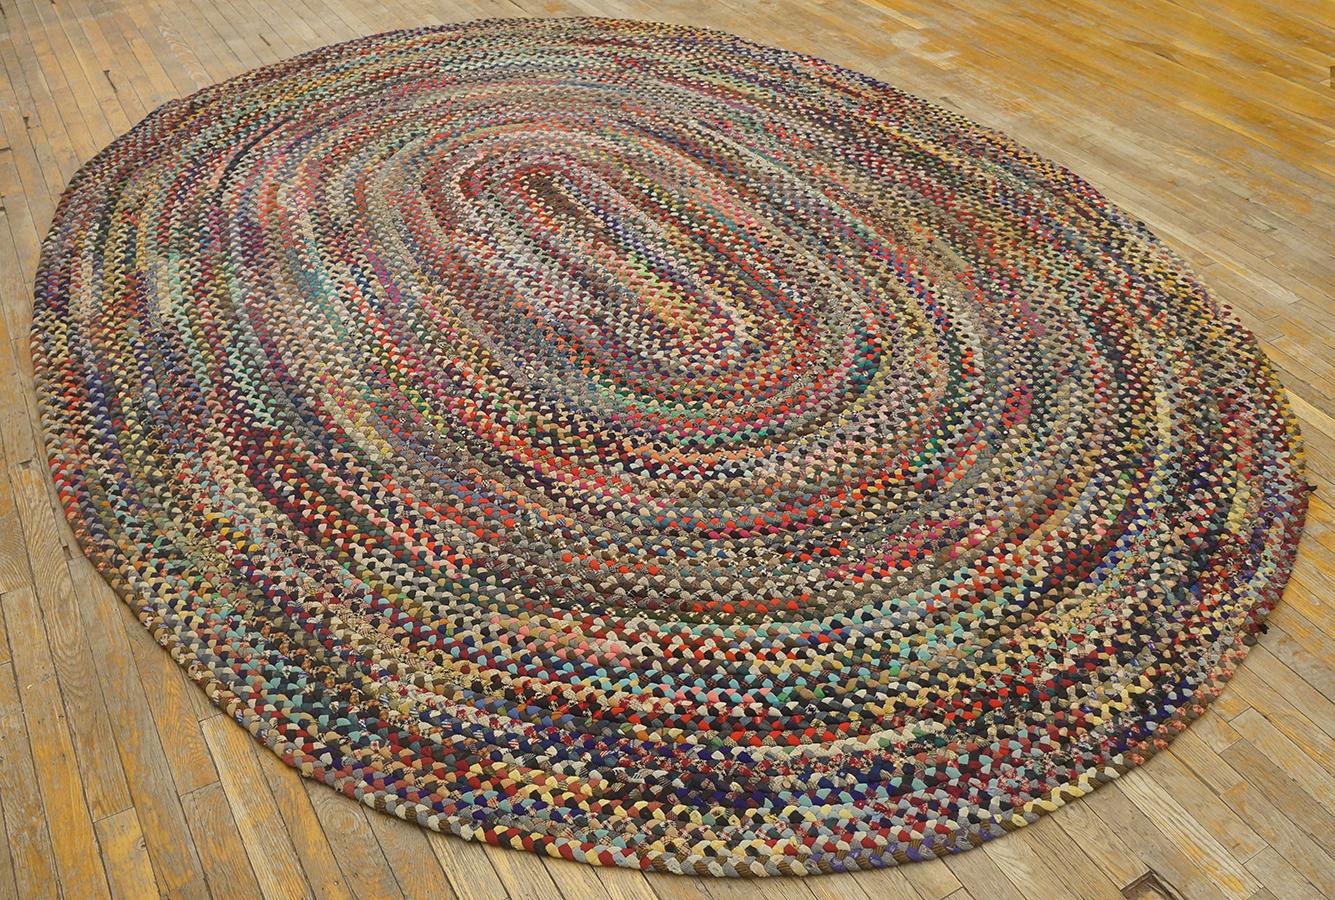 Hand-Woven 1930s American Braided Rug ( 8'3